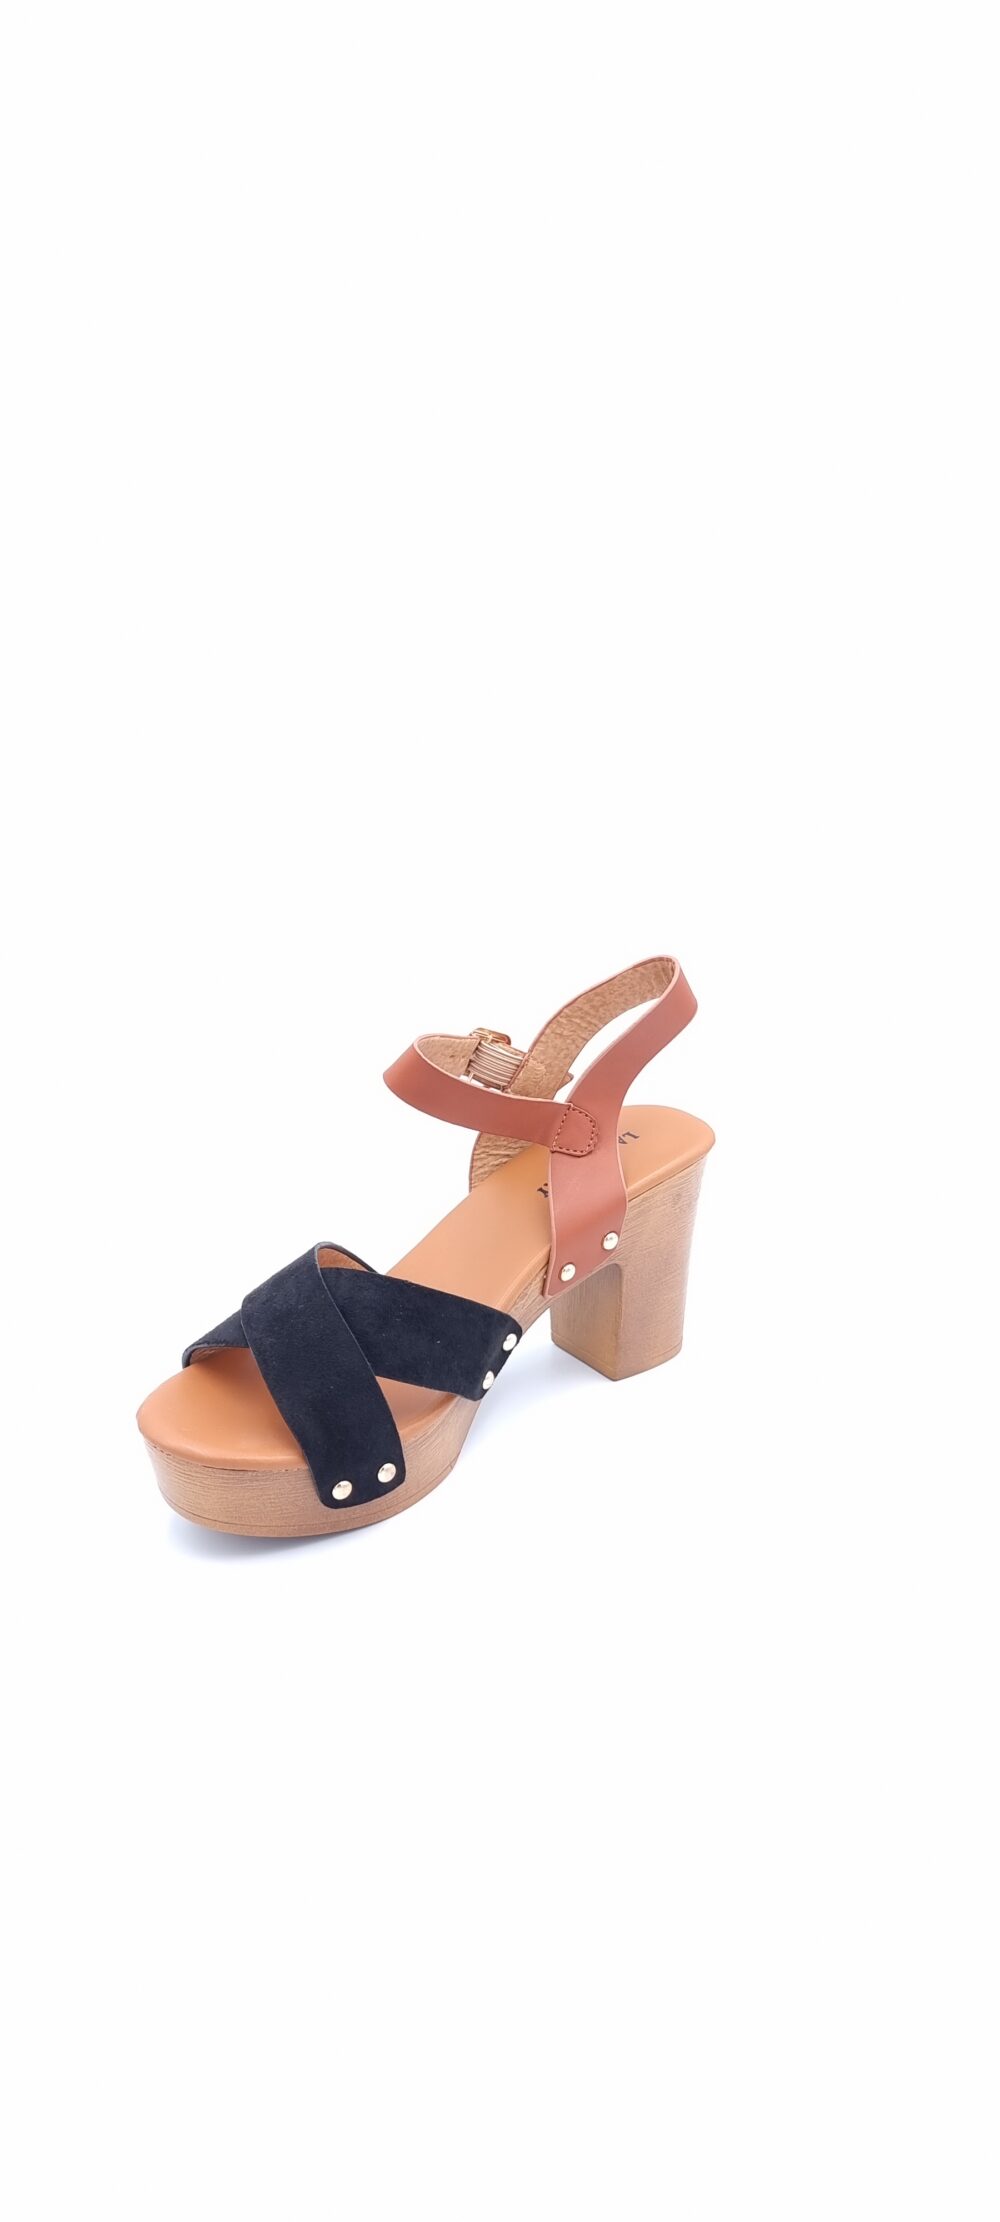 Sandal with wooden heel and cross pattern black